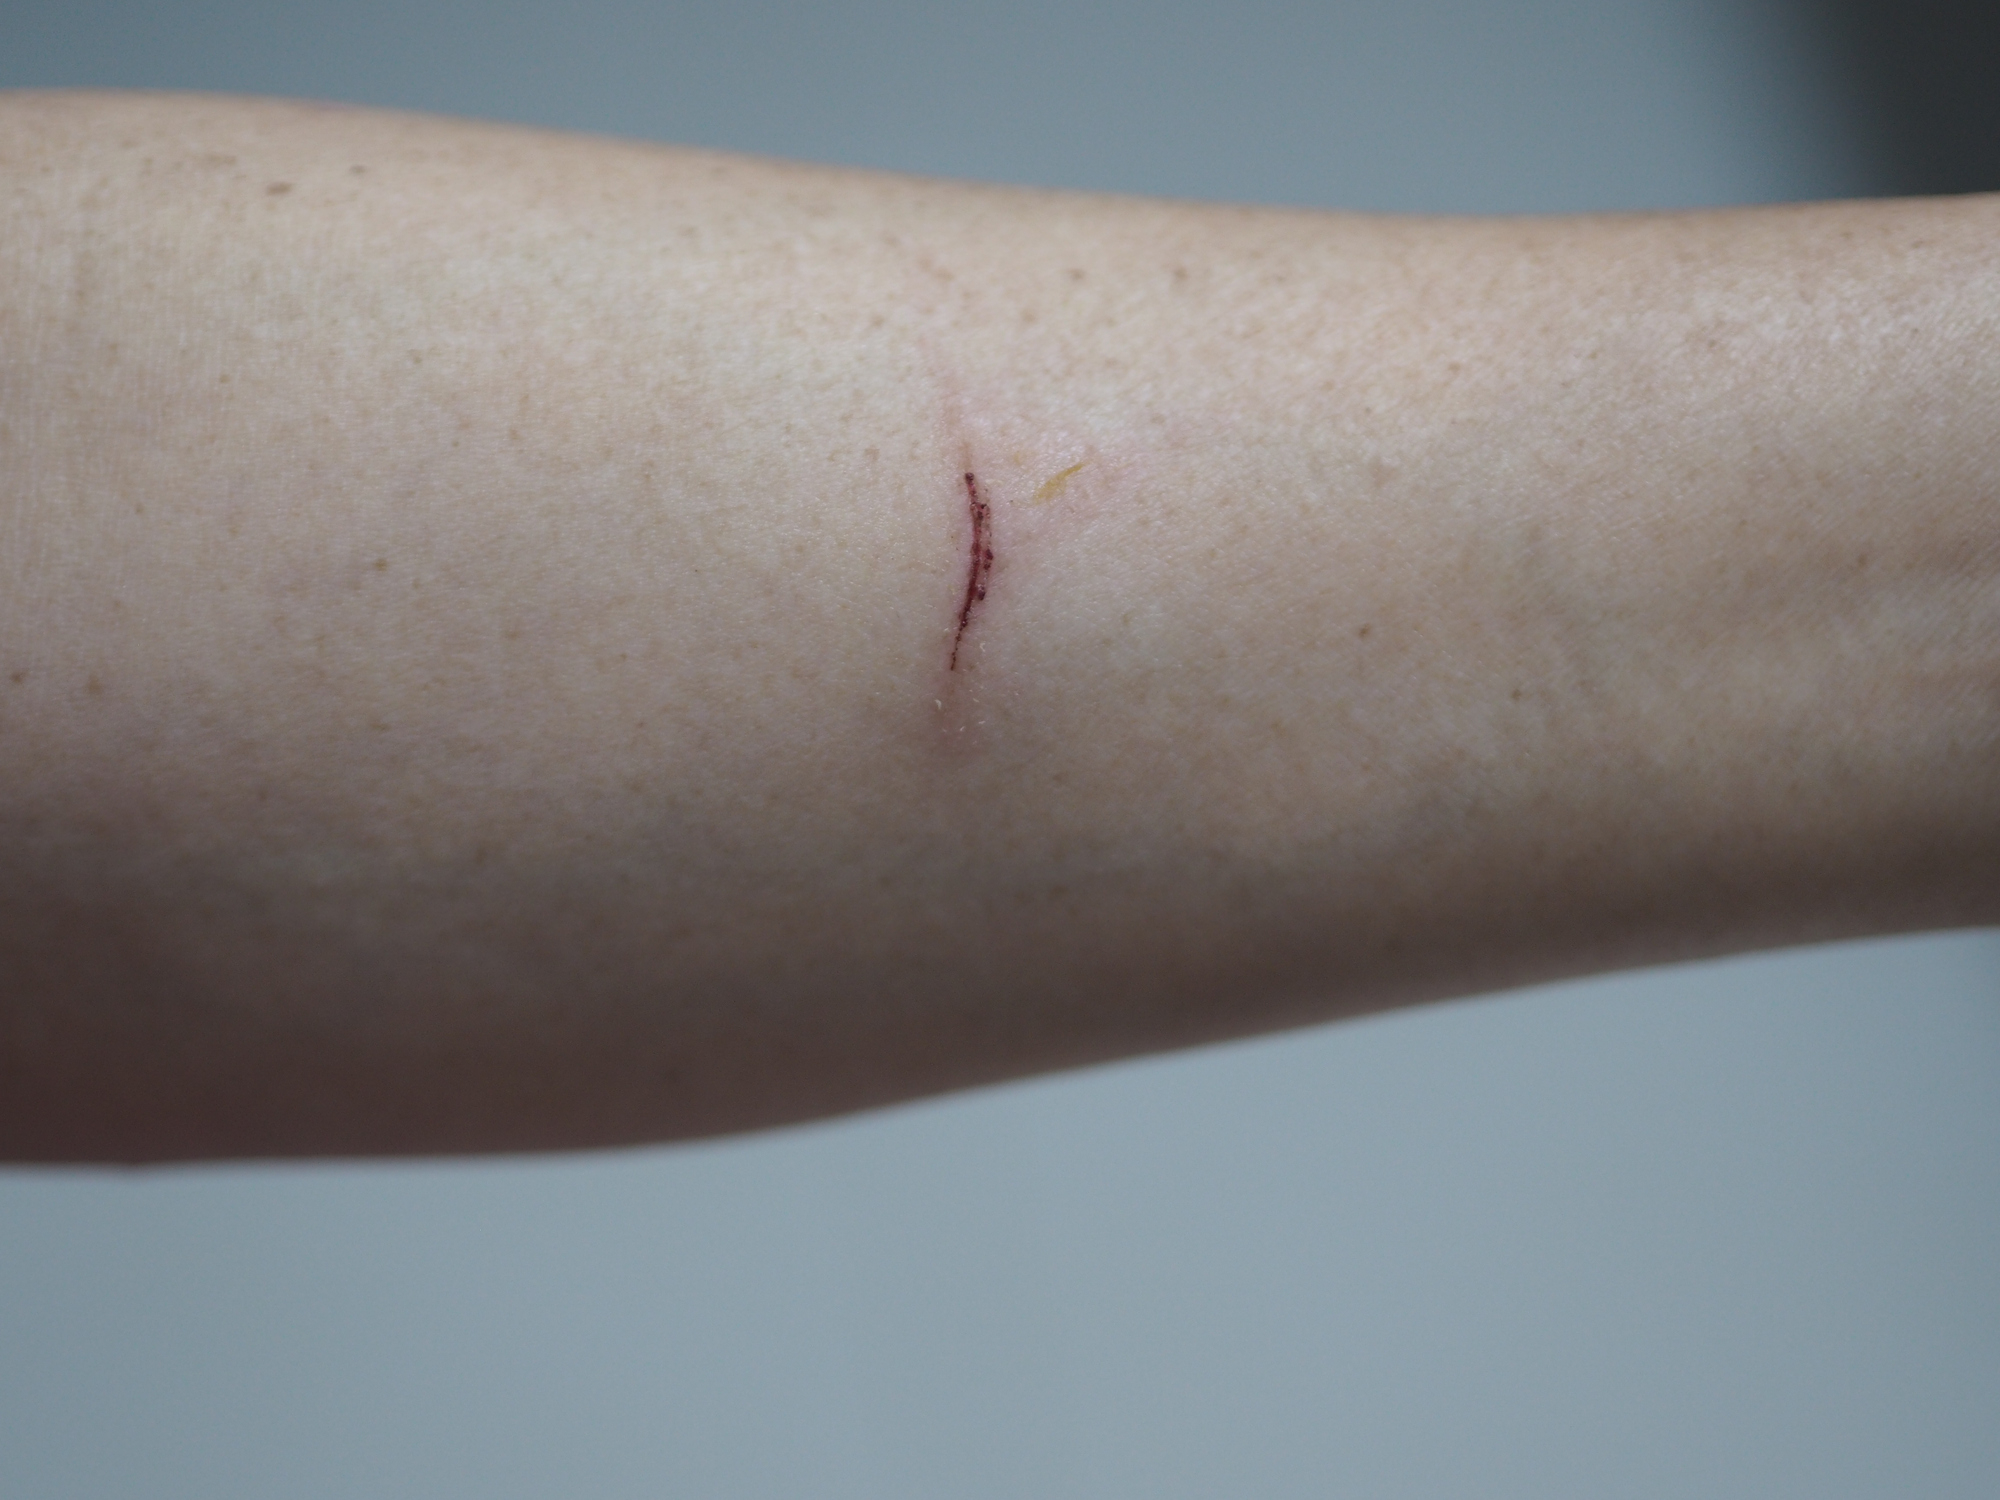 Close-up of a scratch on an arm